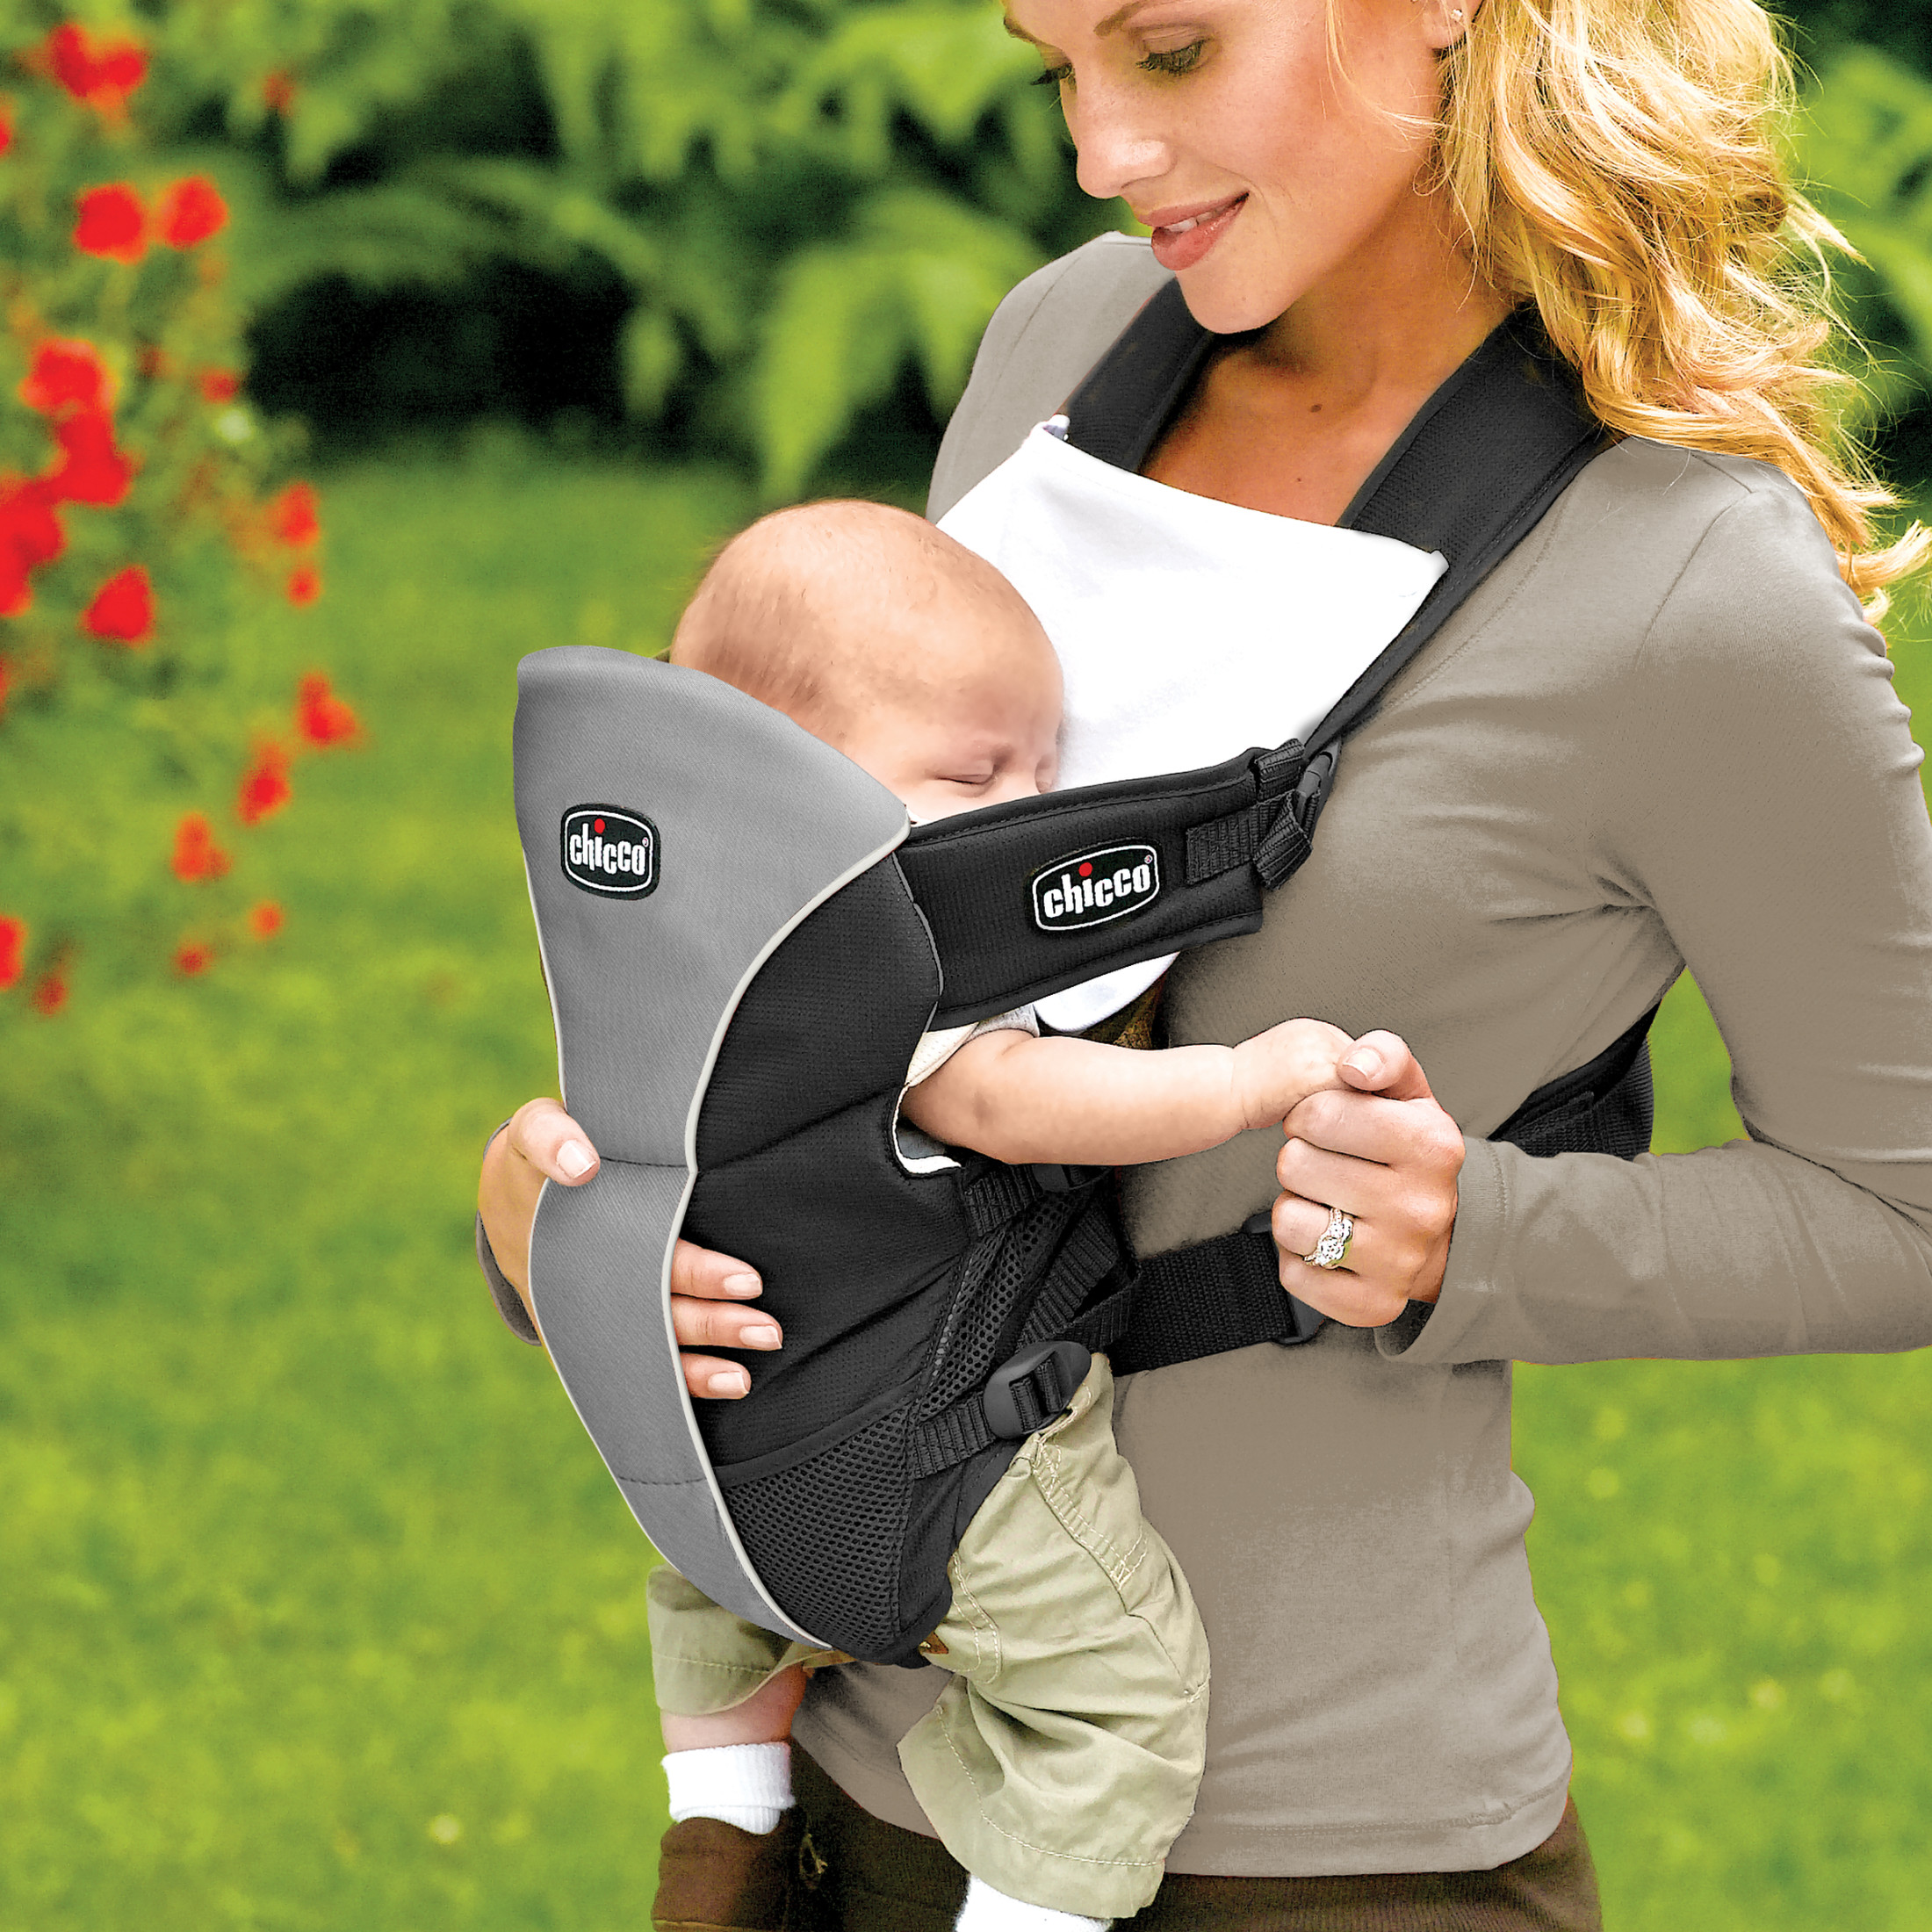 Chicco UltraSoft Infant Carrier - Poetic () - image 3 of 8